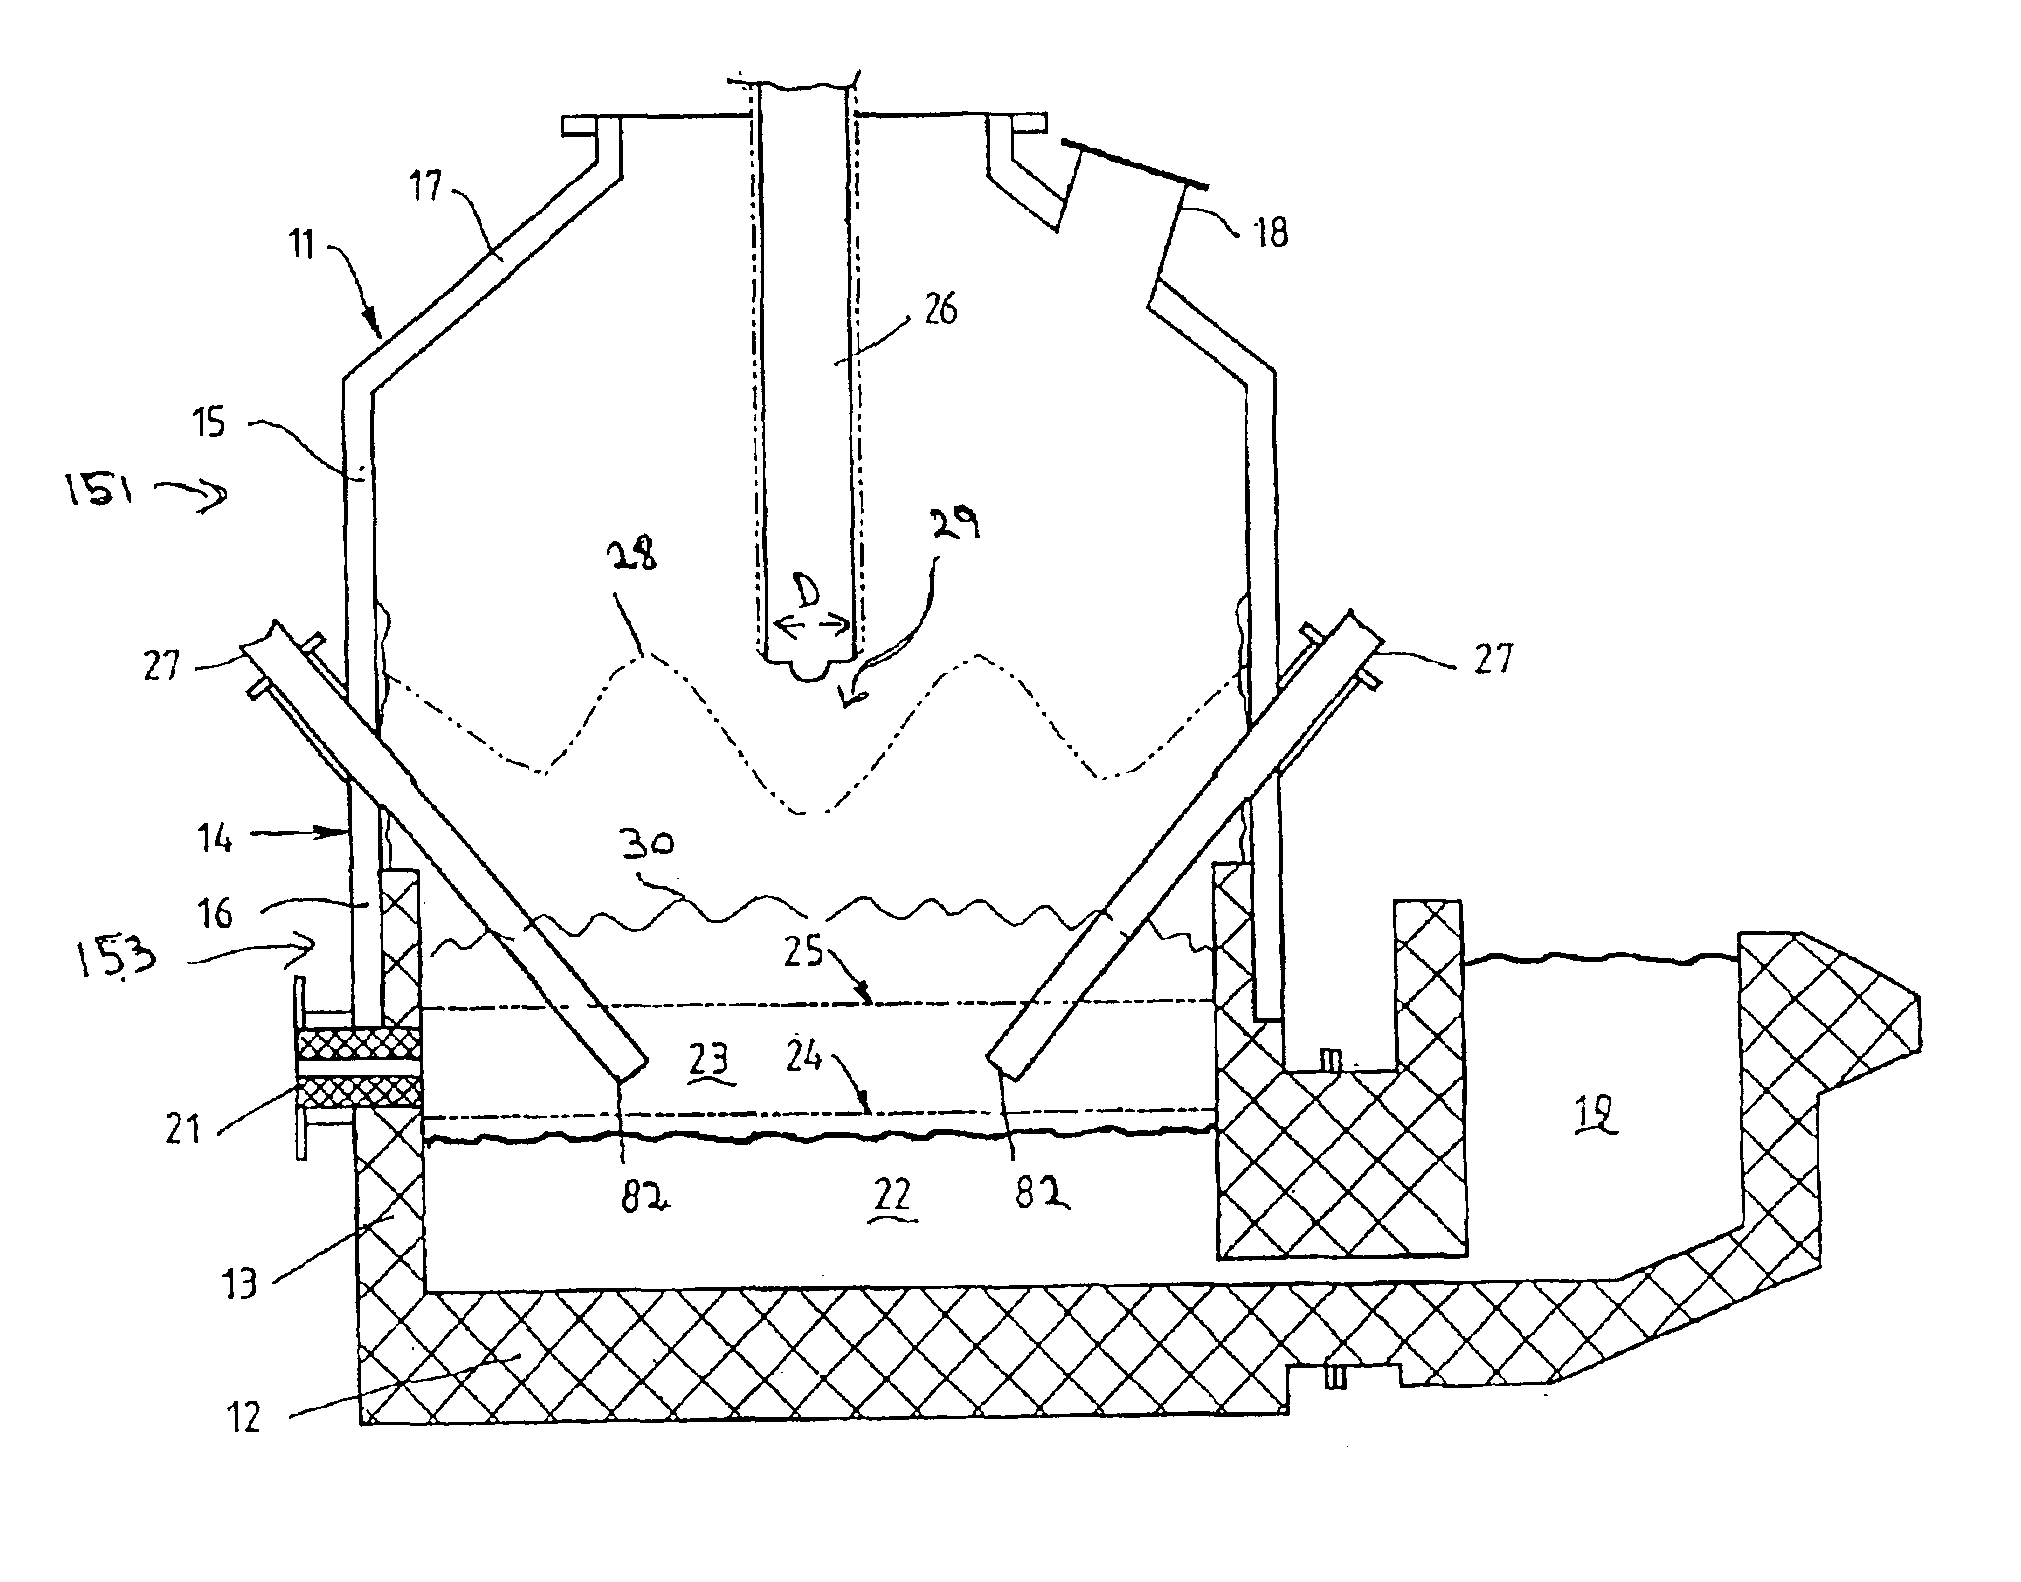 Direct smelting process and apparatus